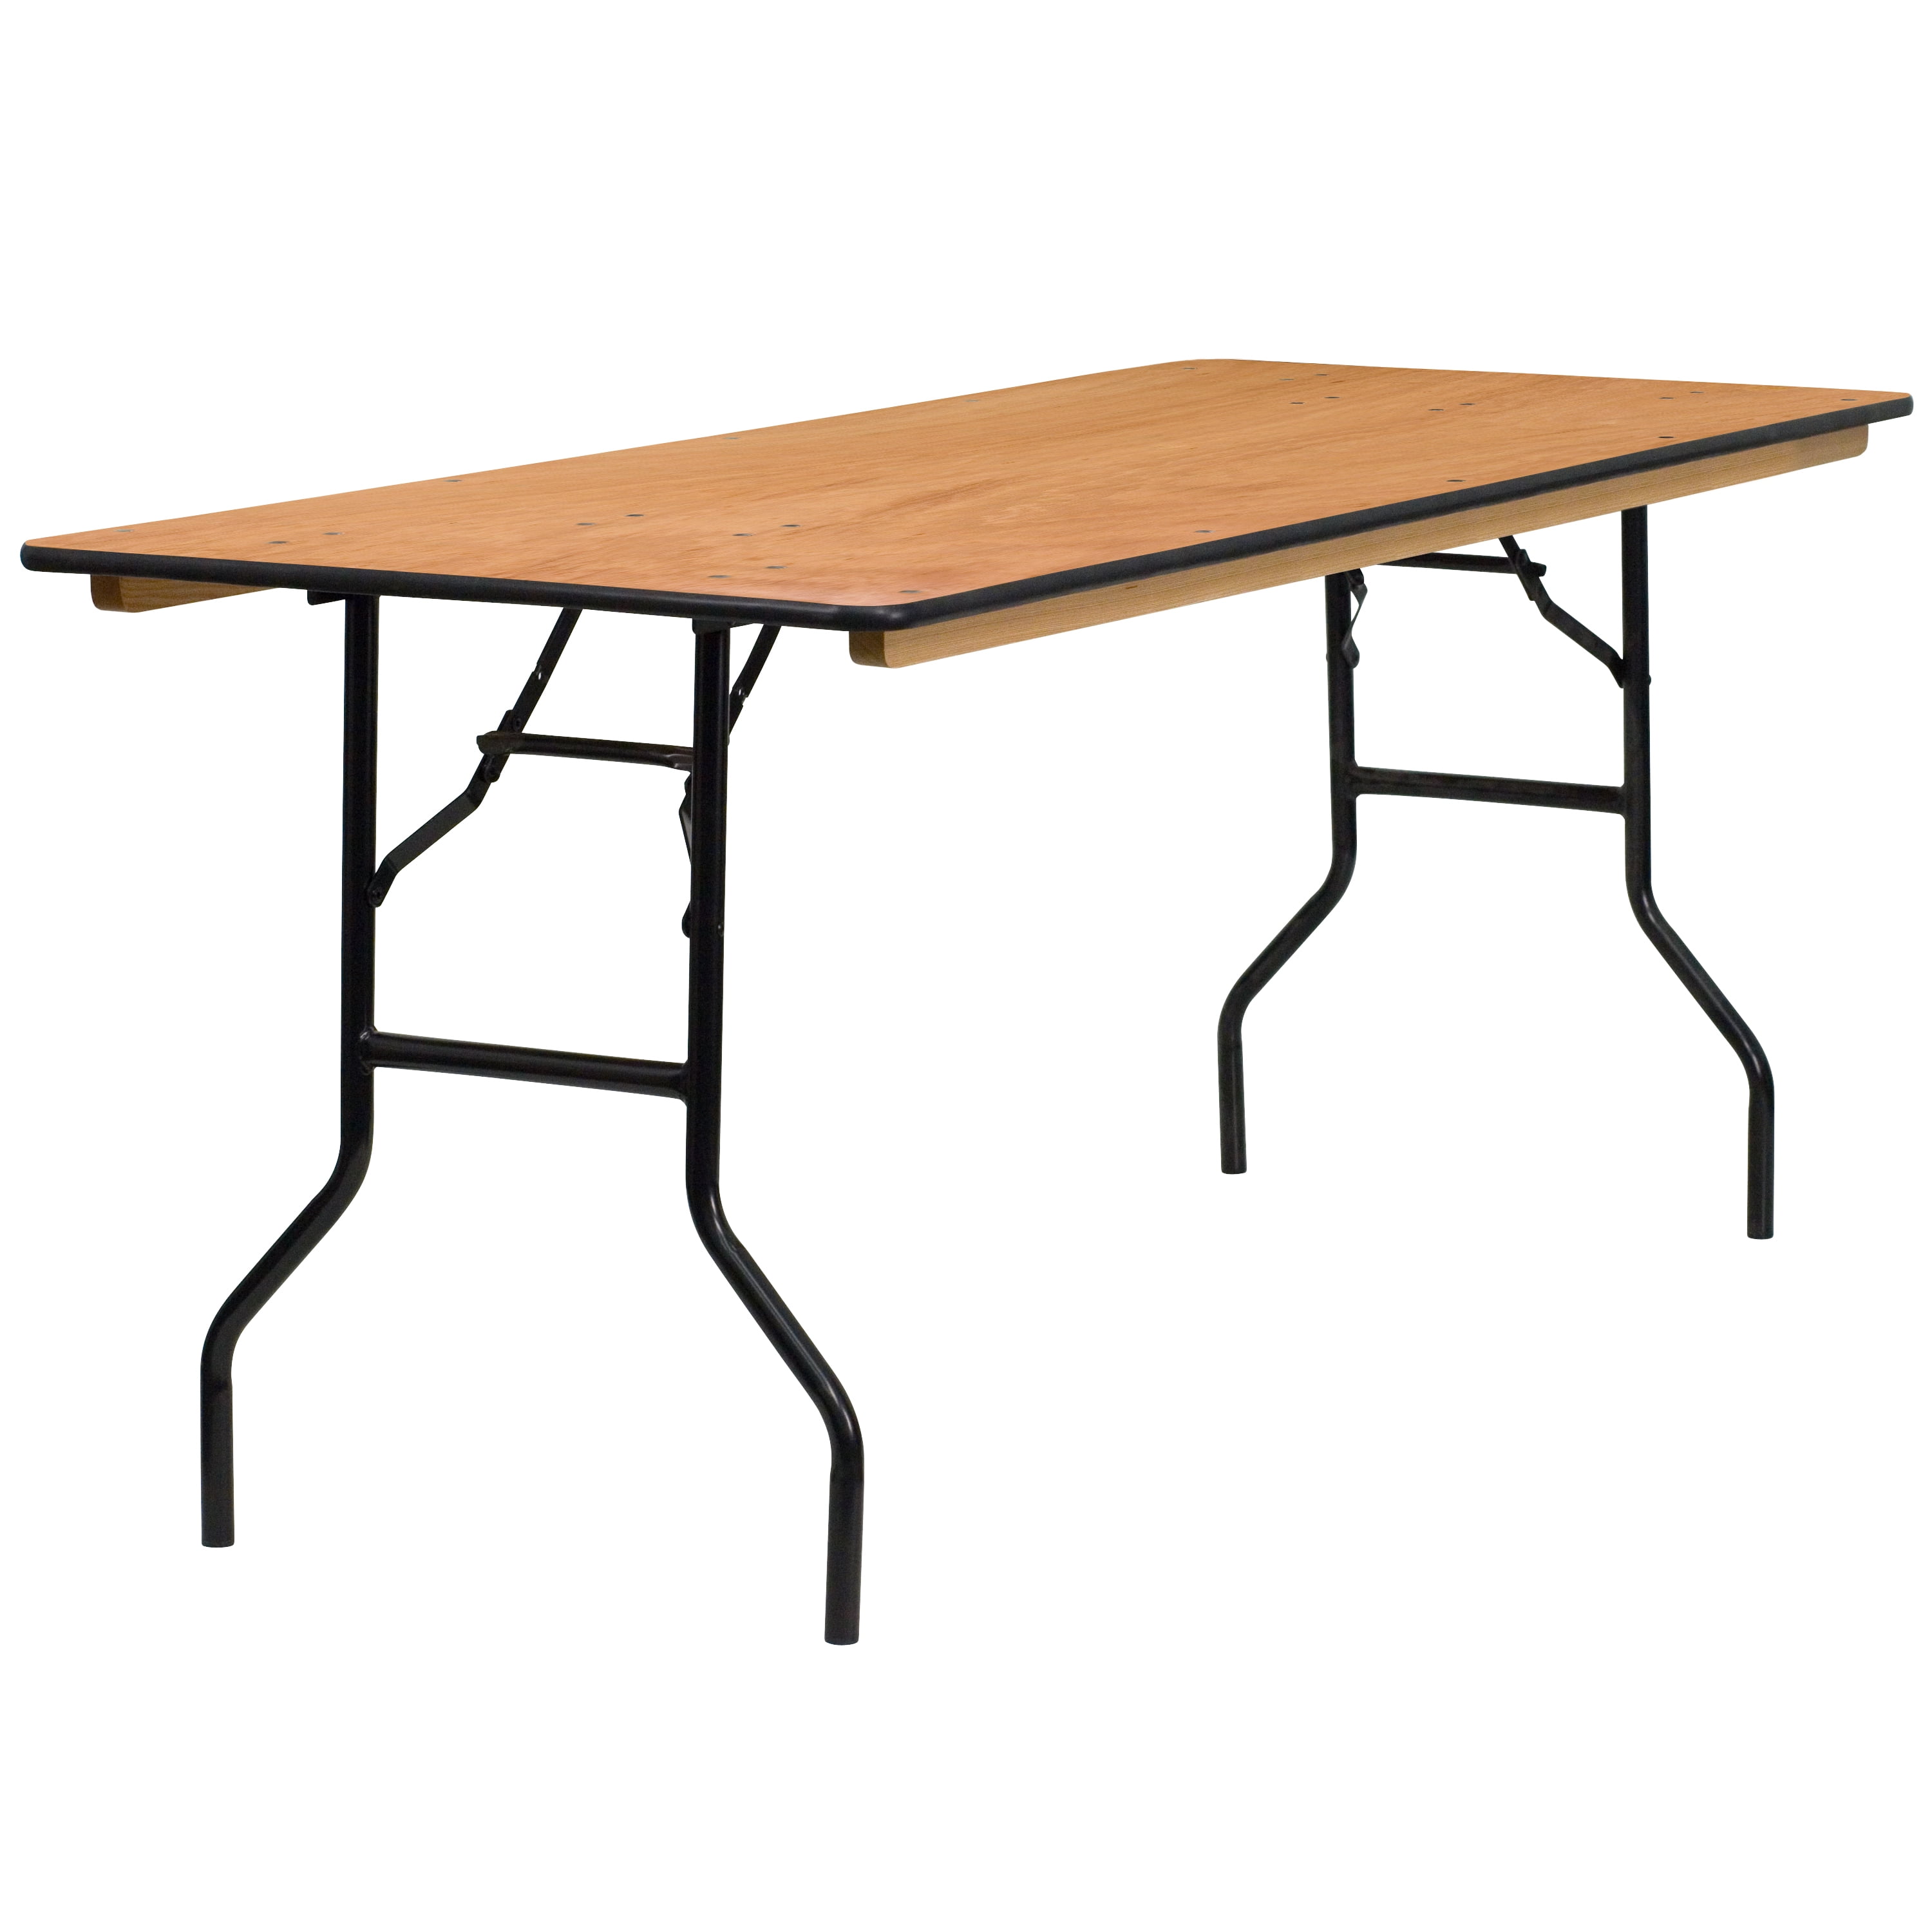 Wood folding banquet table